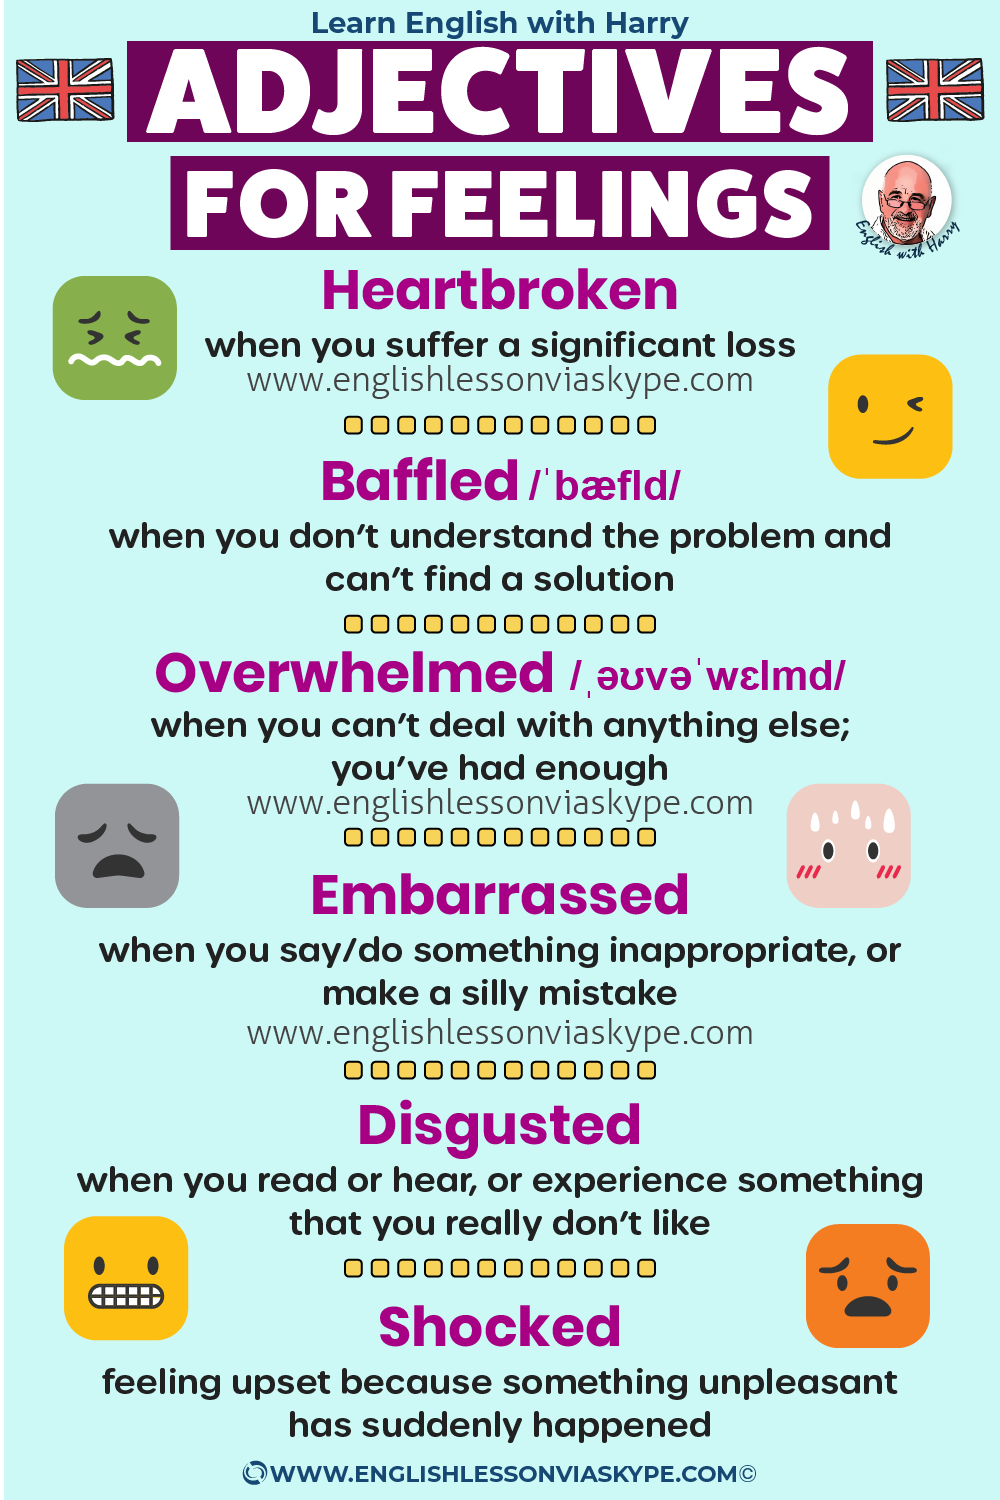 Learn useful adjectives to describe your feelings in English. Advanced English lessons on Zoom and Skype at www.englishlessonviaskype.com #learnenglish #englishlessons #EnglishTeacher #vocabulary #ingles #อังกฤษ #английский #aprenderingles #english #cursodeingles #учианглийский #vocabulário #dicasdeingles #learningenglish #ingilizce #englishgrammar #englishvocabulary